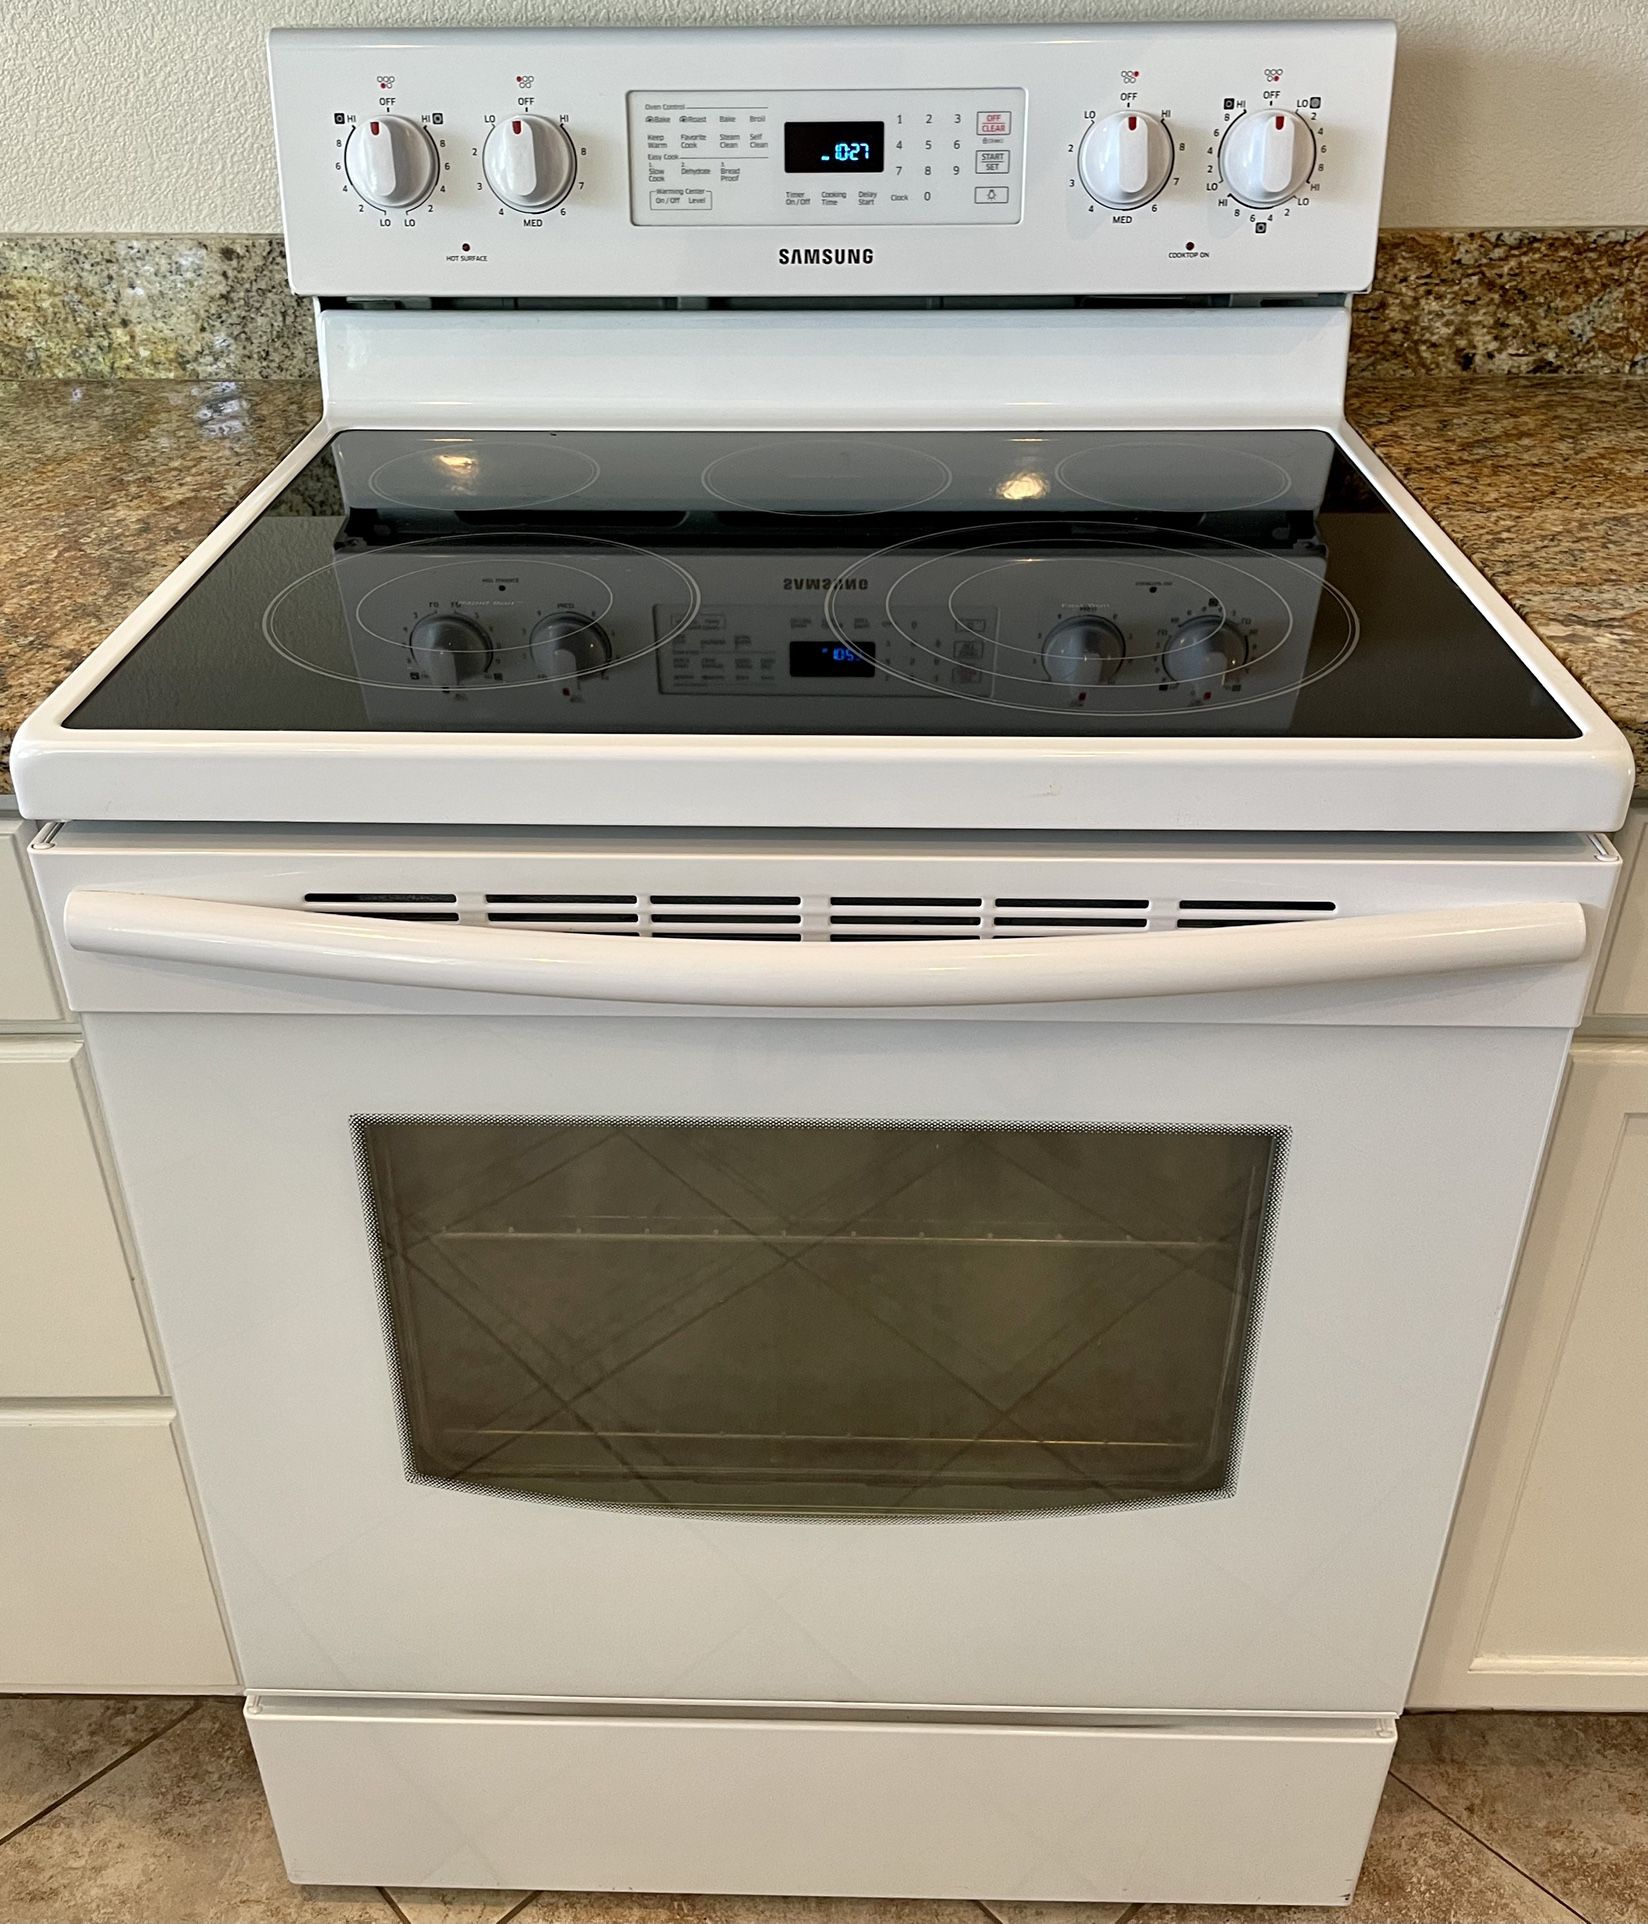 Samsung 30 in White 5 Burner Electric Range Stove Stovetop w/ 5.9 Cu Ft True Convection Oven